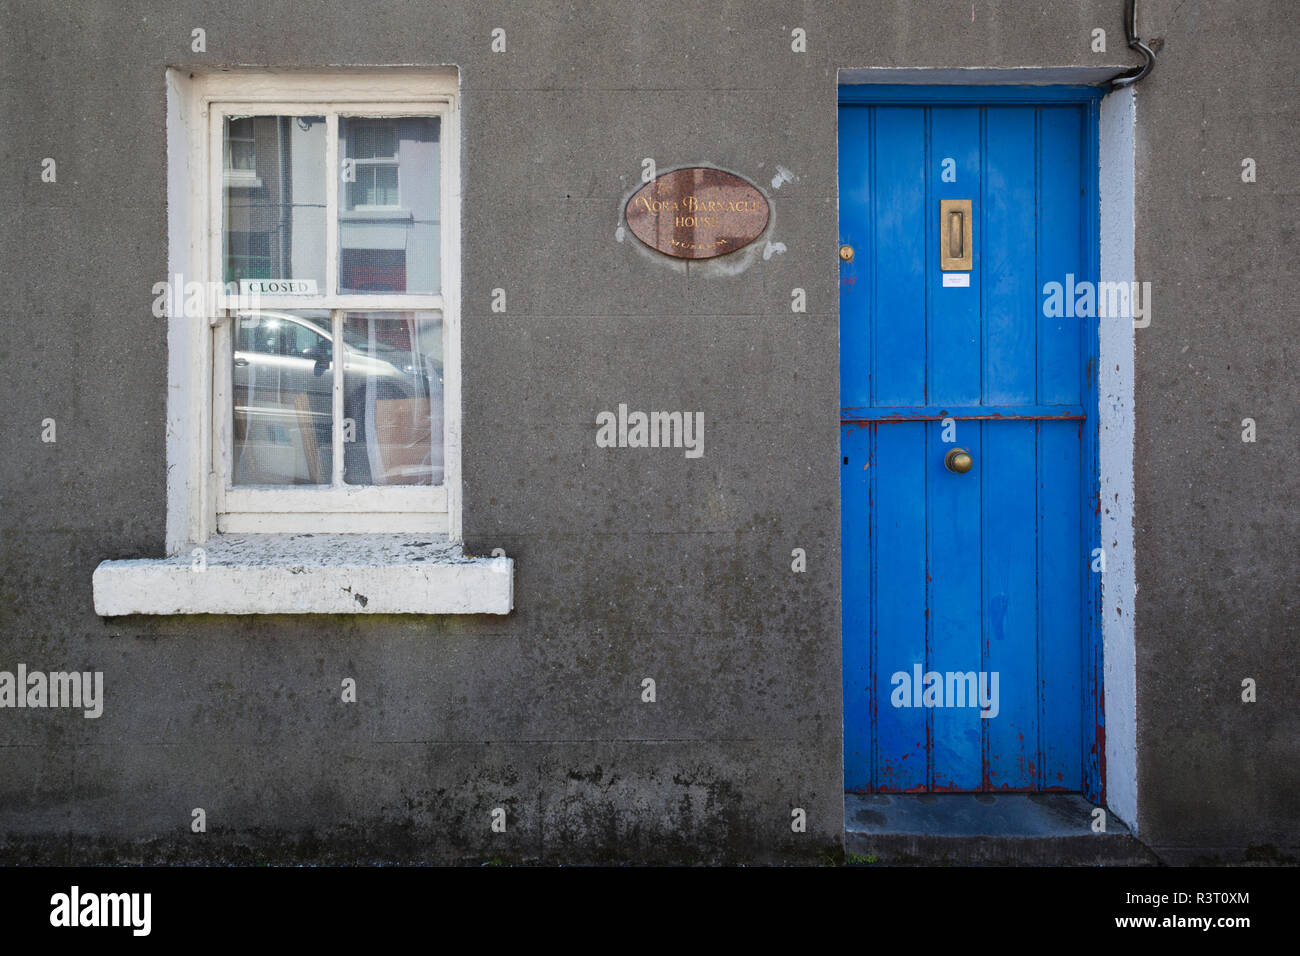 Ireland, County Galway, Galway City, Nora Barnacle House, former home of the wife of James Joyce, Nora Barnacle Stock Photo